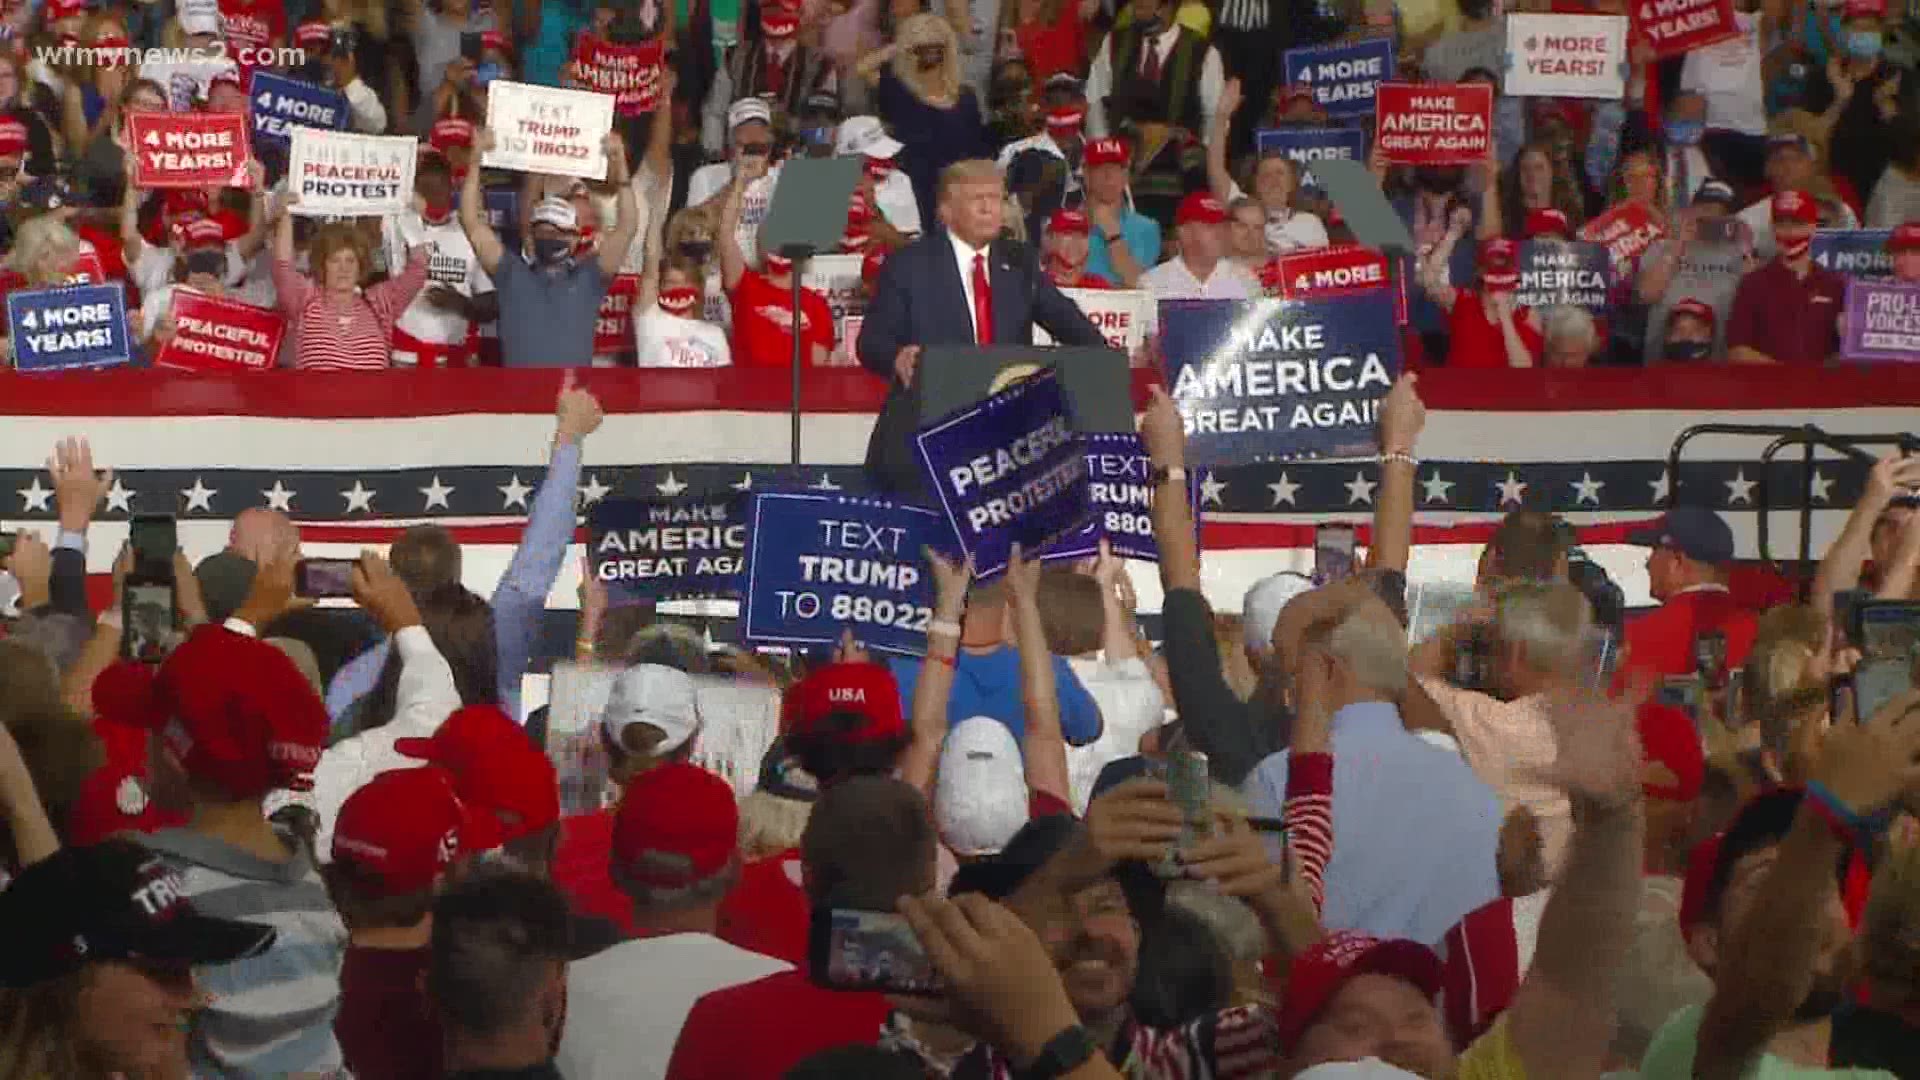 President Trump brought his re-election campaign to the Triad. It's his first public event in the Triad since he took the oath of office.